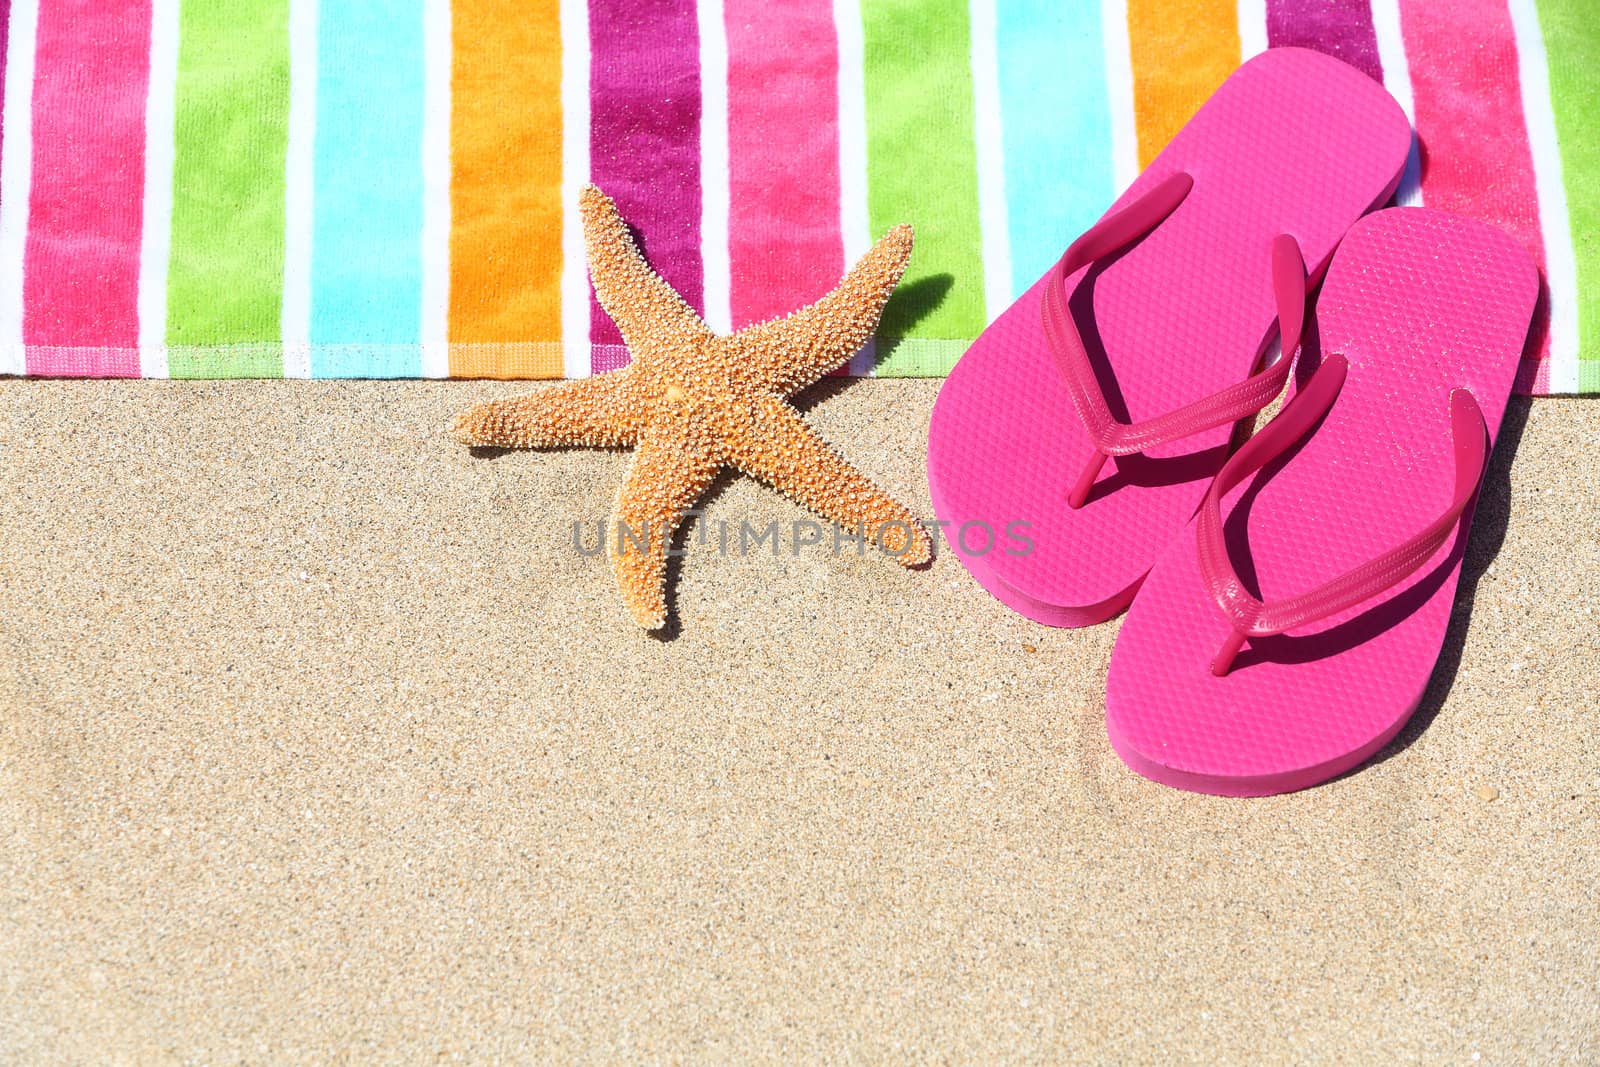 Tropical beach vacation holiday and travel concept with a colourful striped beach towel and vibrant pink sandal flip flip thongs on pristine sand with a starfish at an idyllic coastal beach resort.